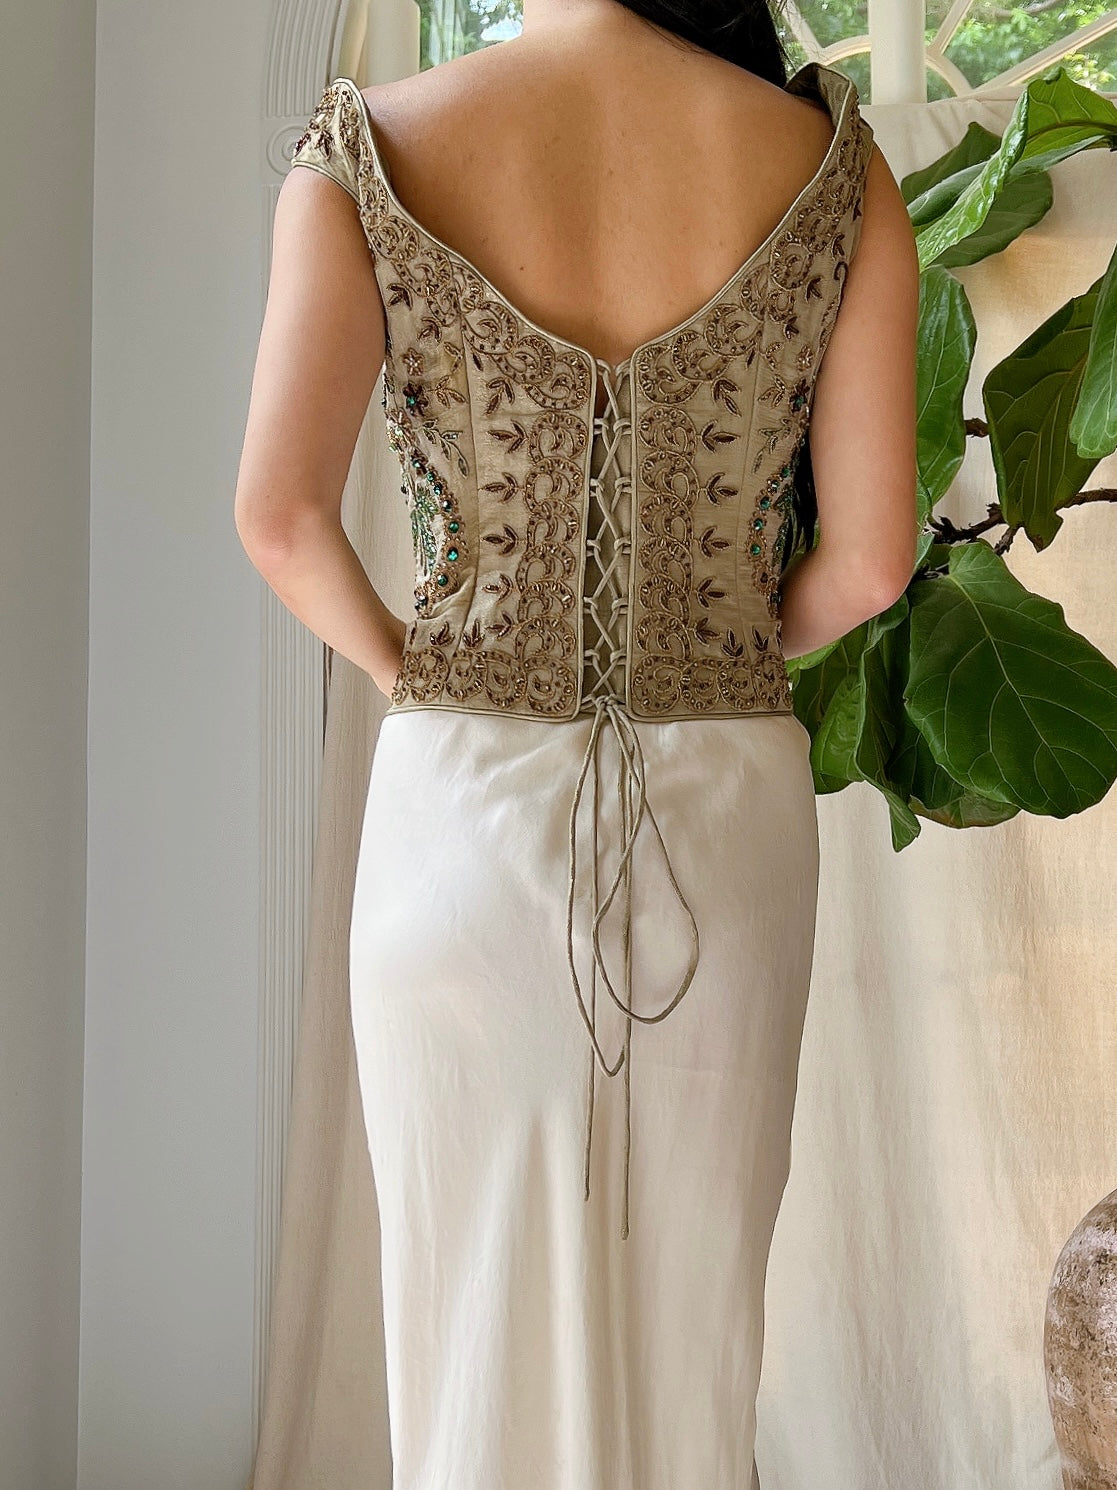 Vintage Embroidered Bustier - XL